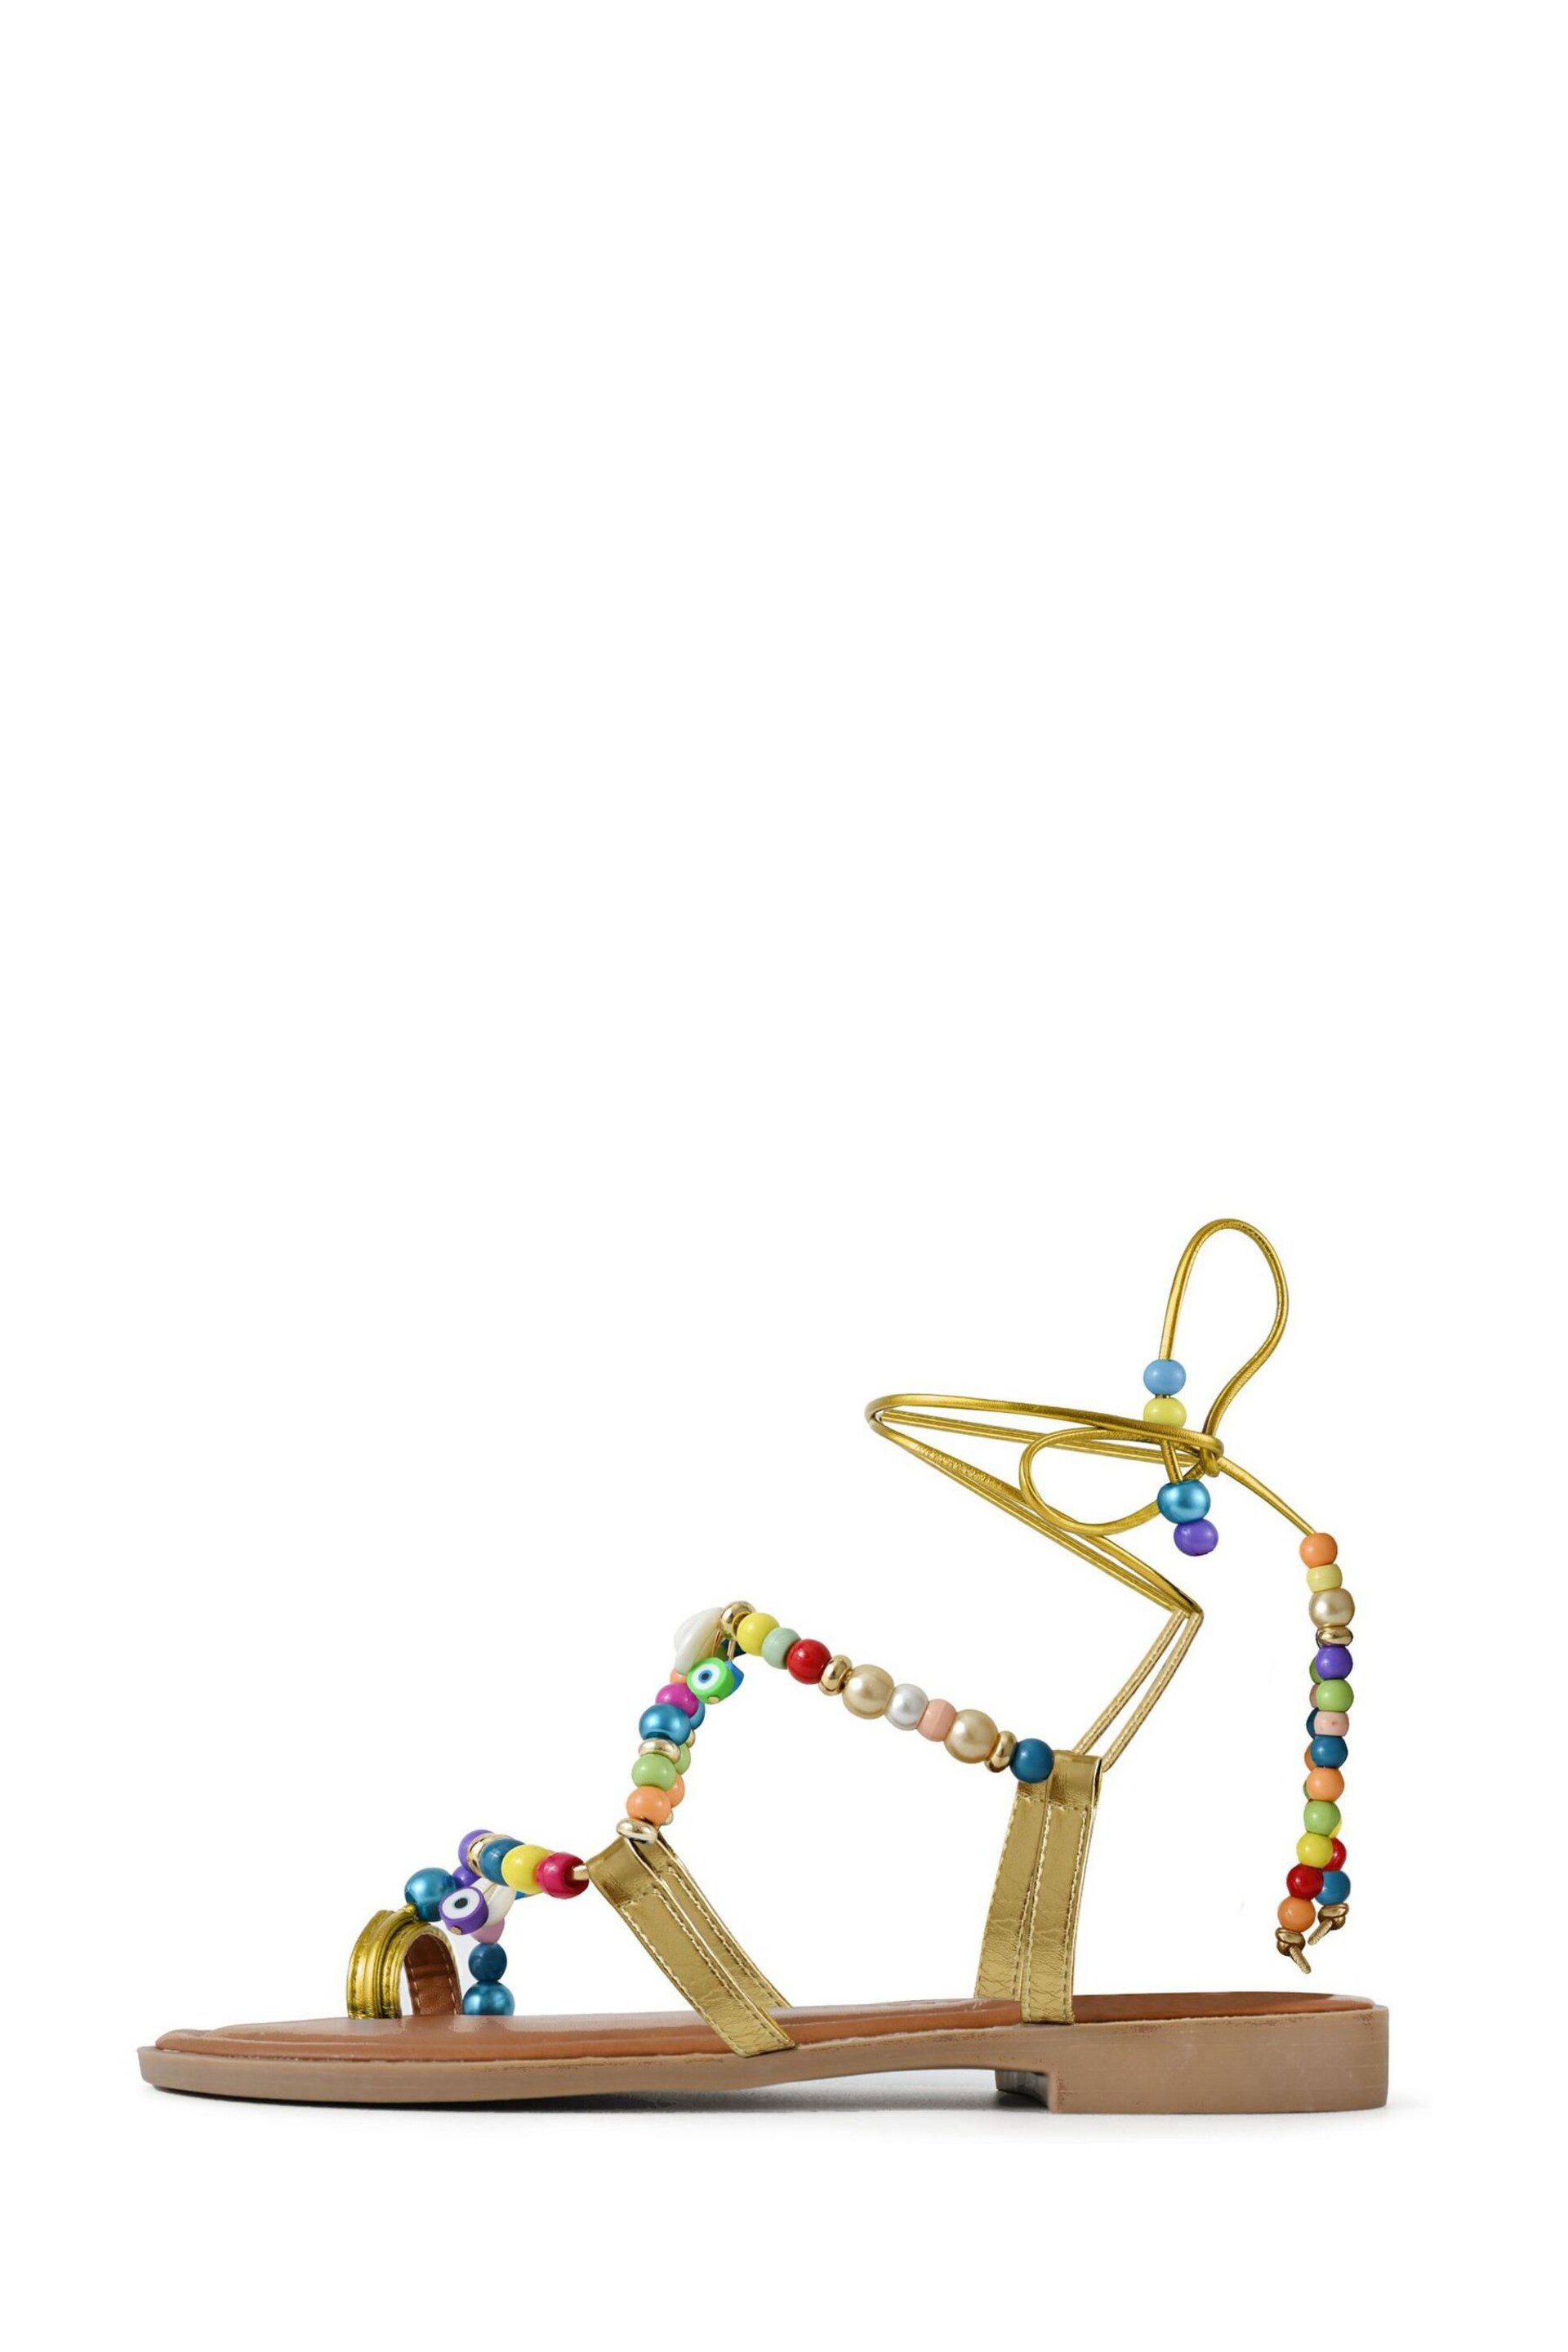 South Beach Neutral Multi Beaded Strappy Sandal - Image 2 of 4